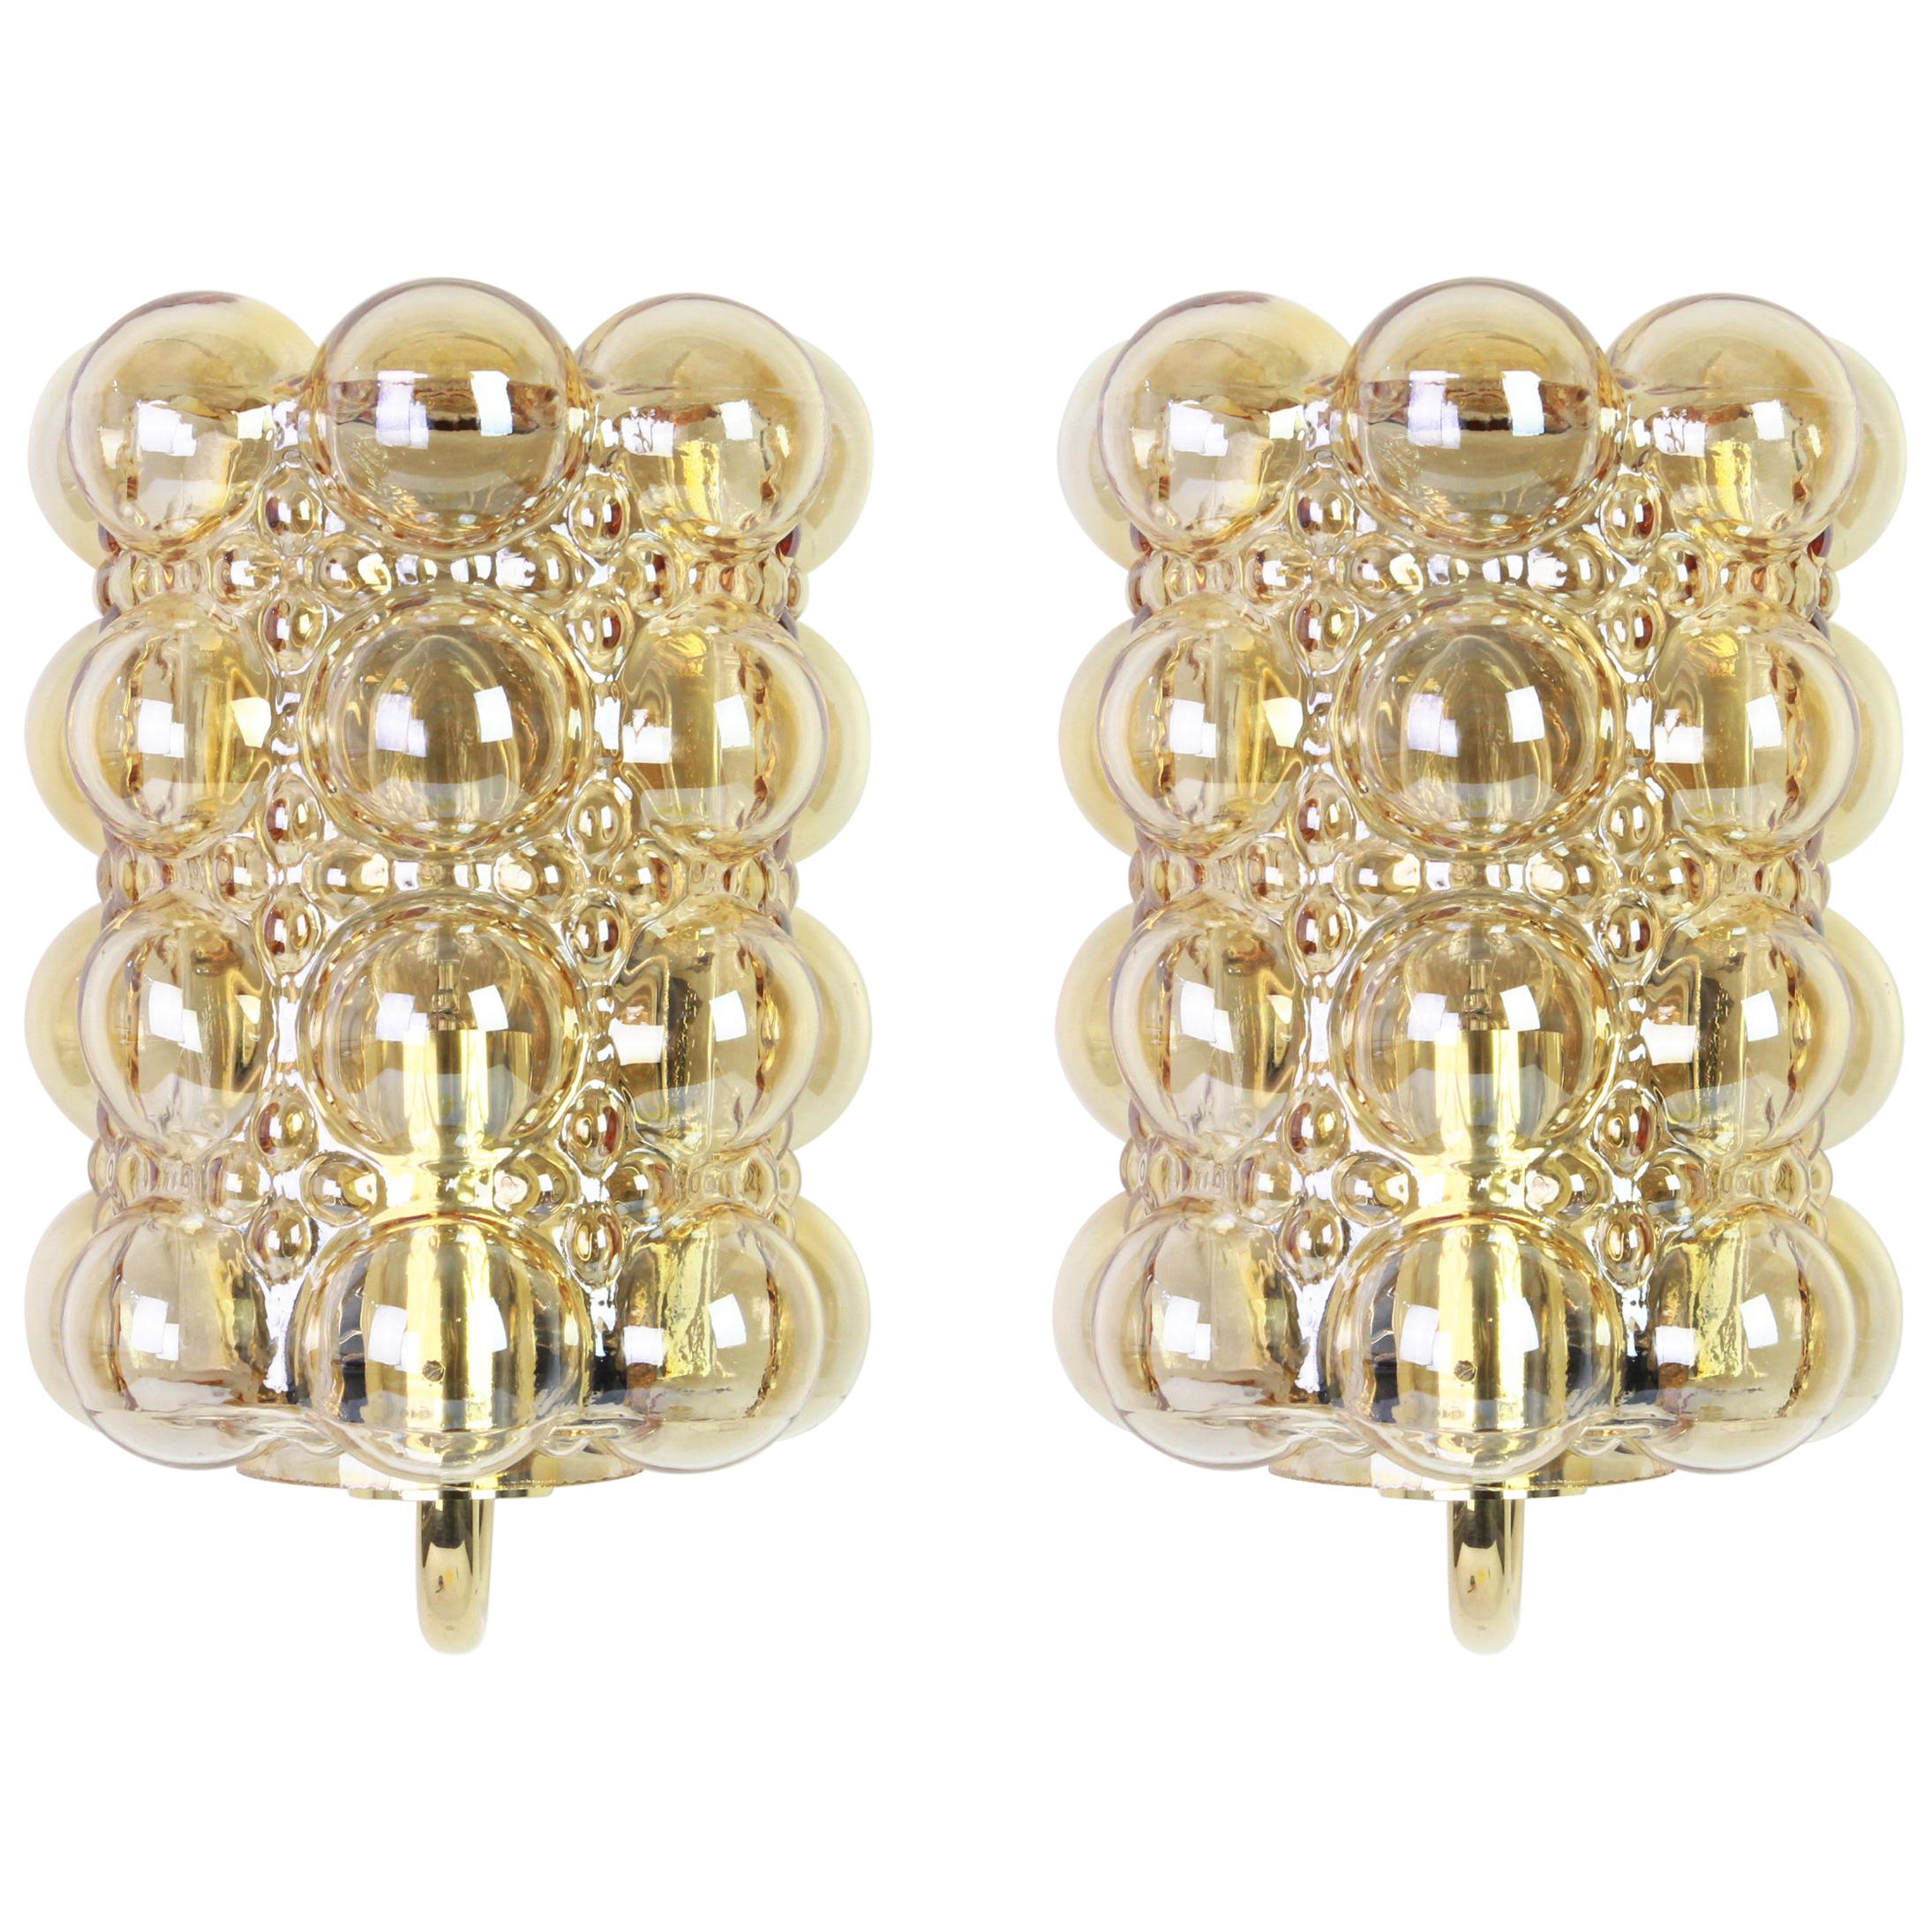 Wonderful pair of golden wall lights, from Limburg Glashütte, Germany, circa 1960-1970. Smoked bubble glasses on a golden brass base.

For each sconce:

Heavy quality and in very good condition. Cleaned, well-wired and ready to use. The fixture